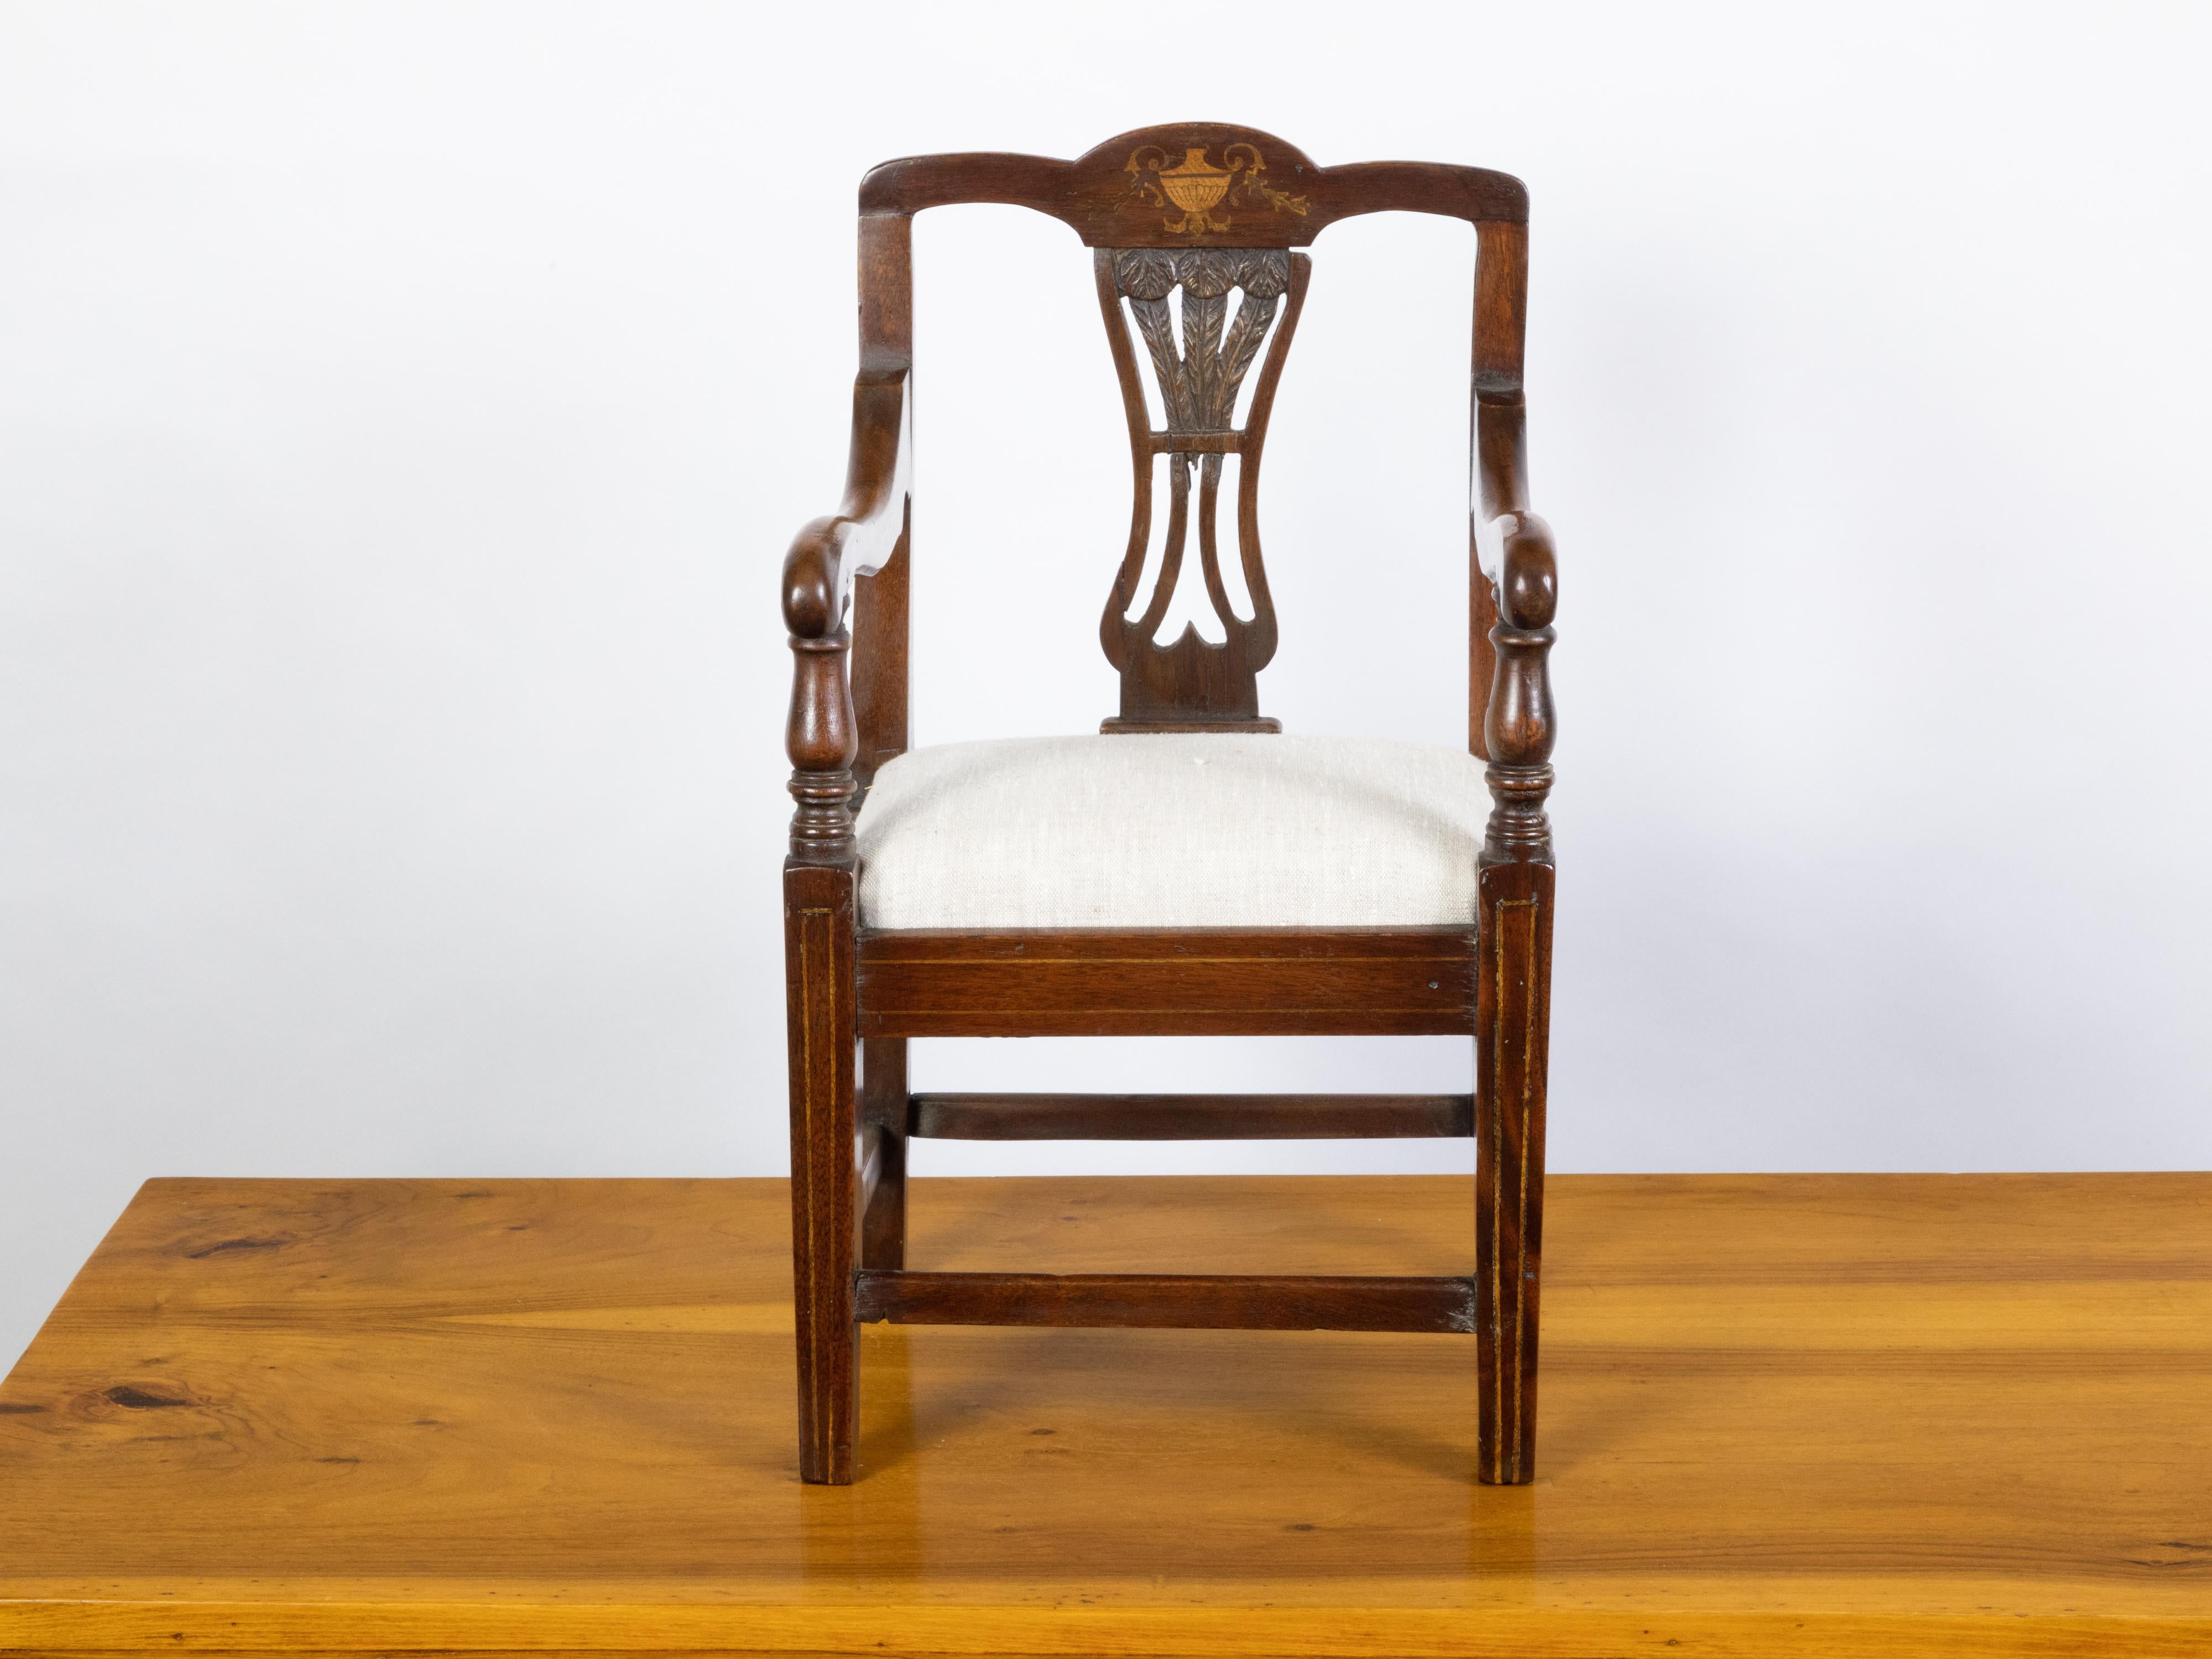 An English mahogany child's chair from the 19th century, with feather motifs and marquetry décor. Created in England during the 19th century, this petite chair features an open back adorned with feather motifs on the splat, and an urn marquetry on